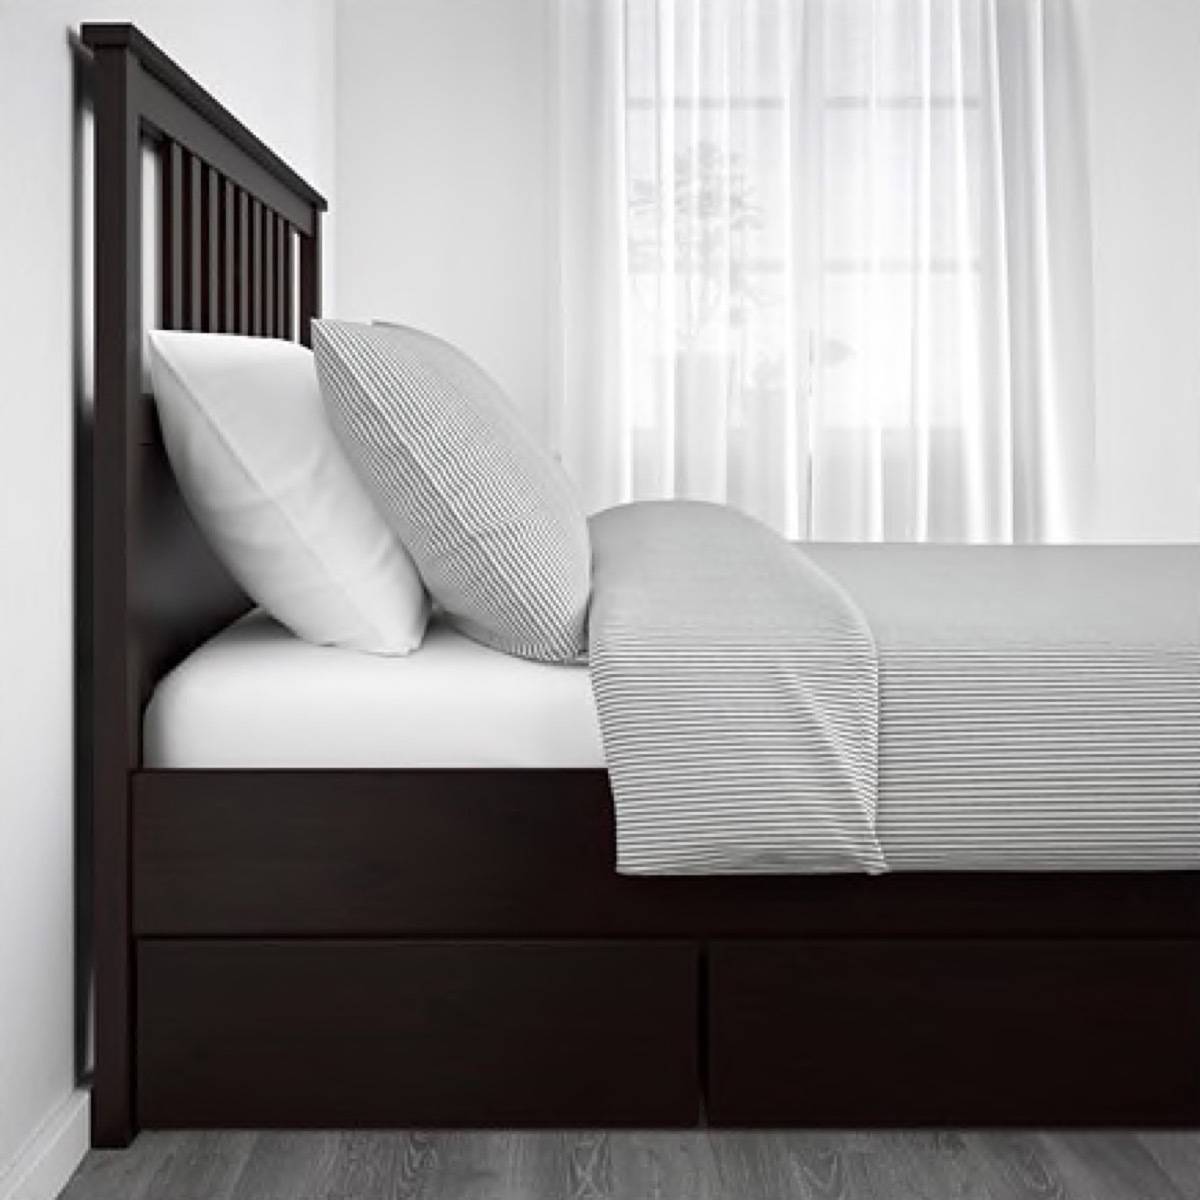 Bed with pull-out storage